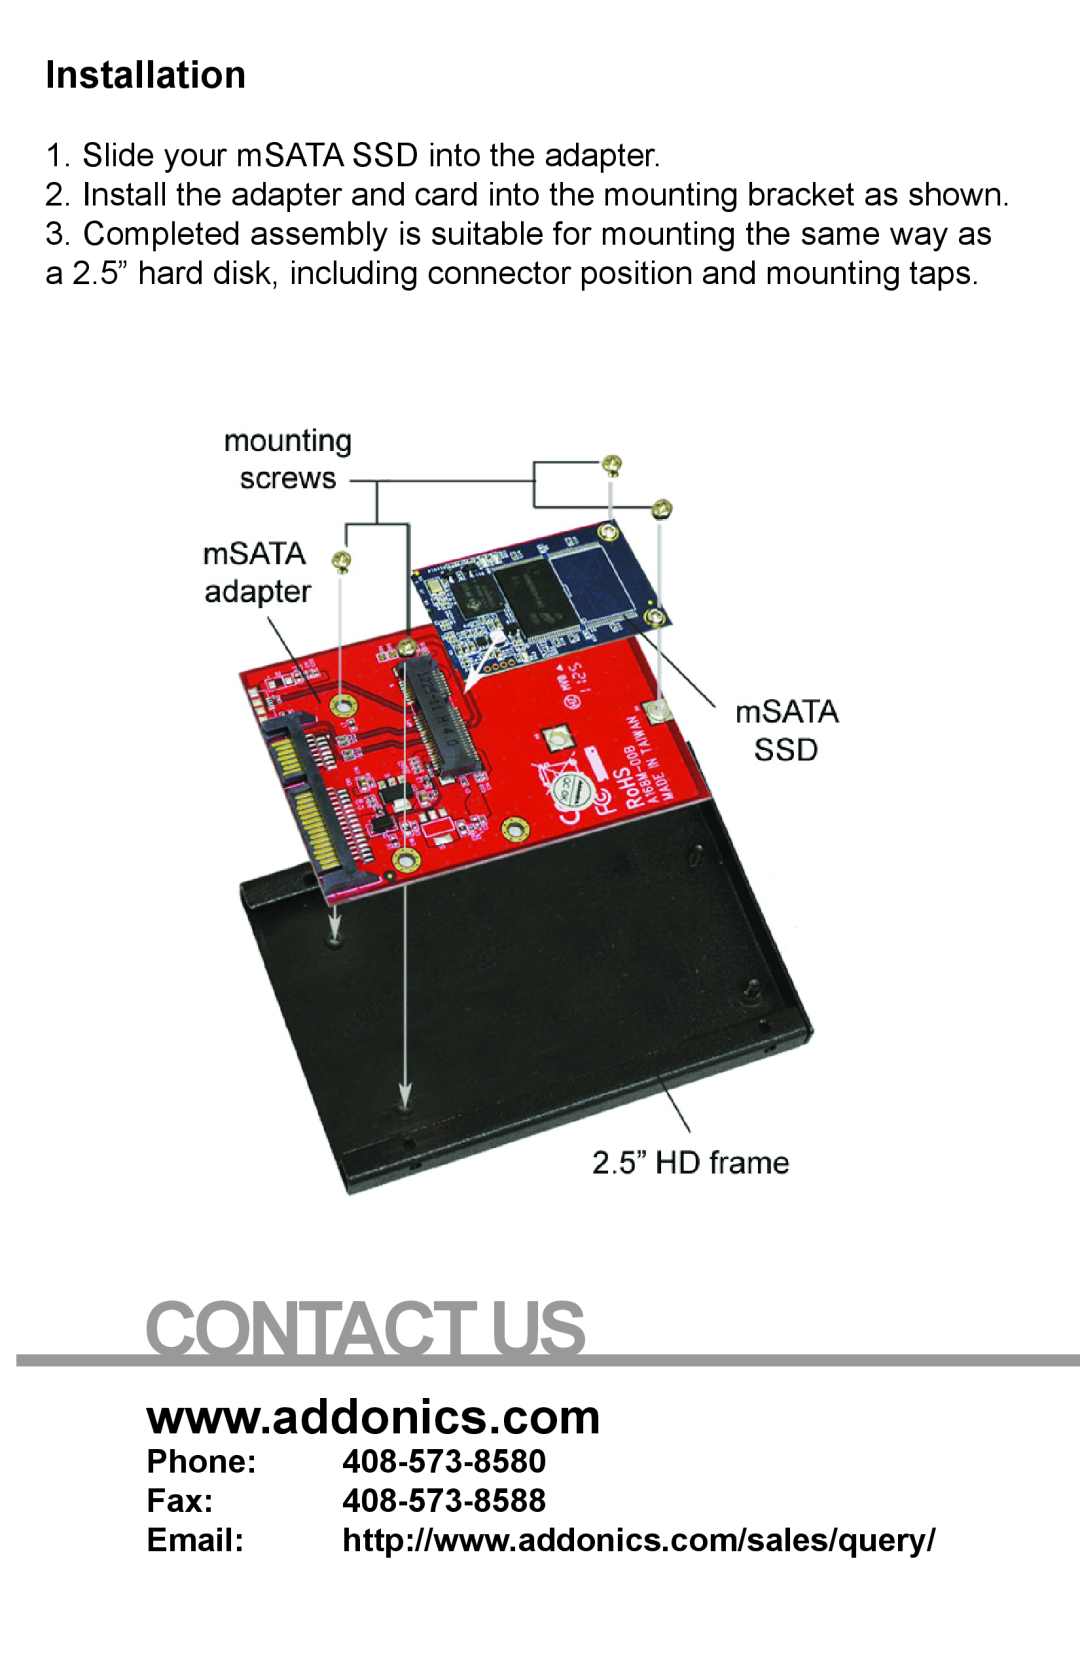 Addonics Technologies AD25MSD manual Contact Us, Installation, Slide your mSATA SSD into the adapter, Phone Fax 